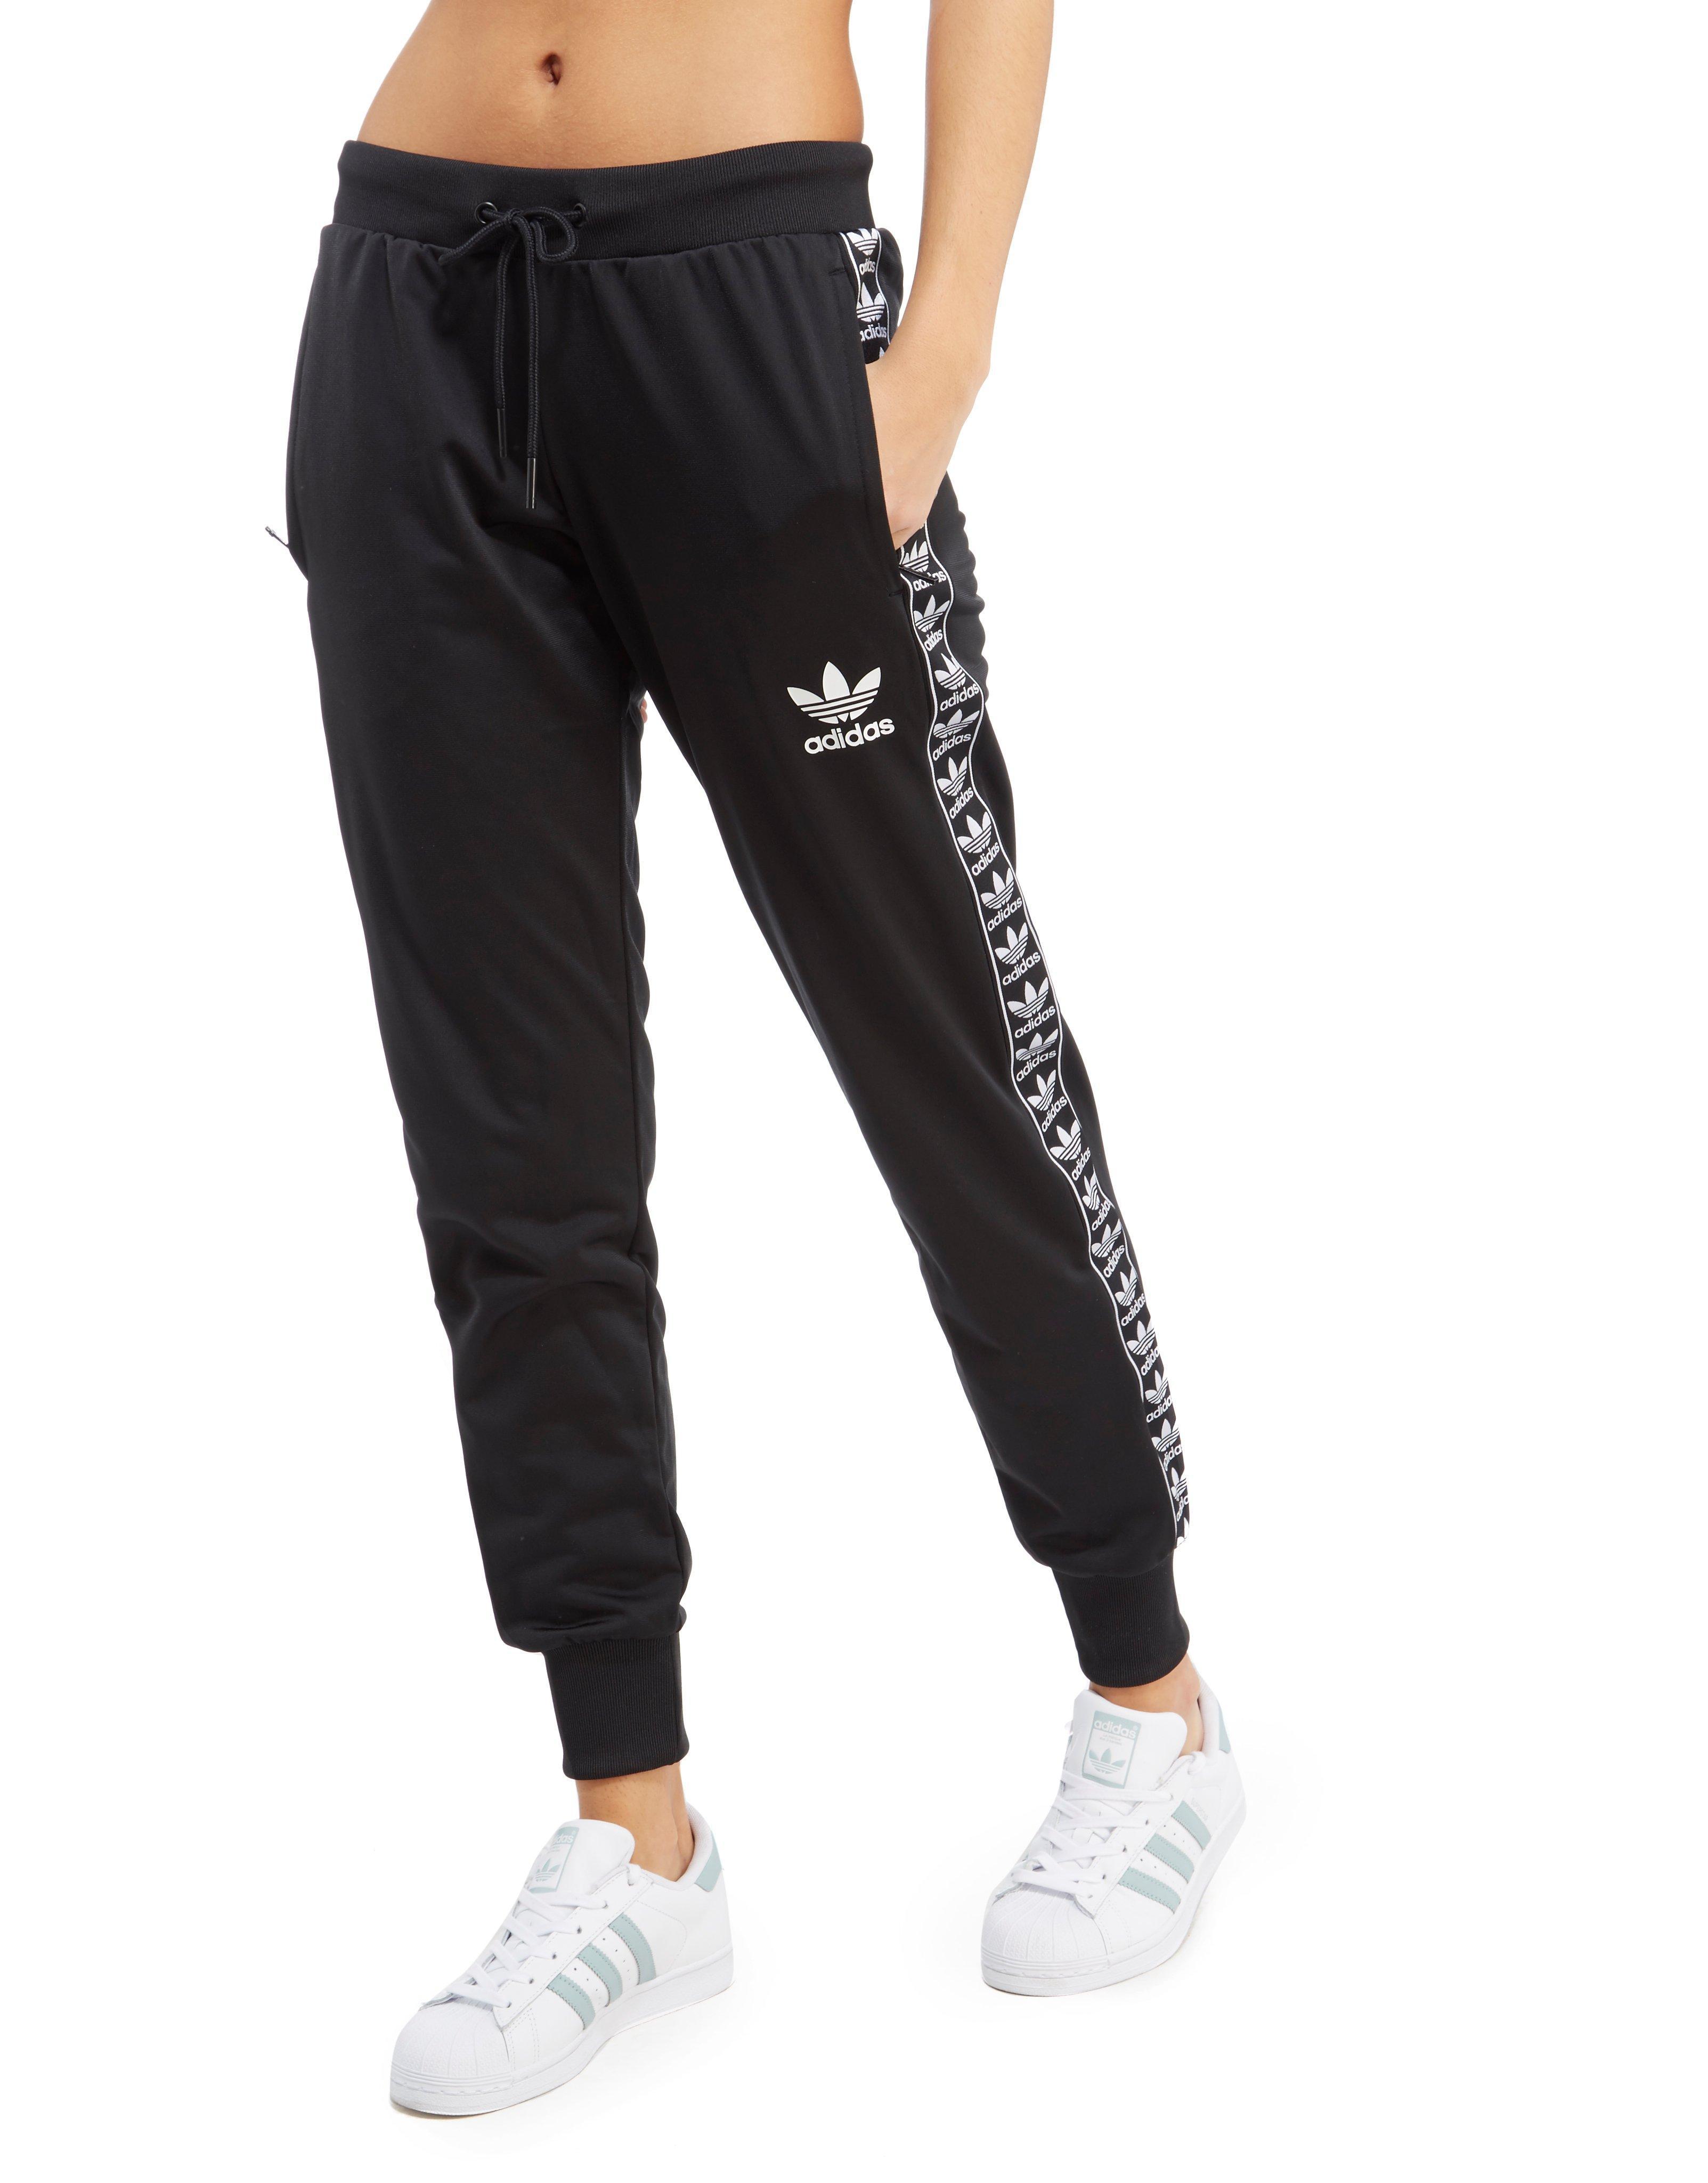 adidas Originals Synthetic Firebird Tape Track Pants in Black - Lyst